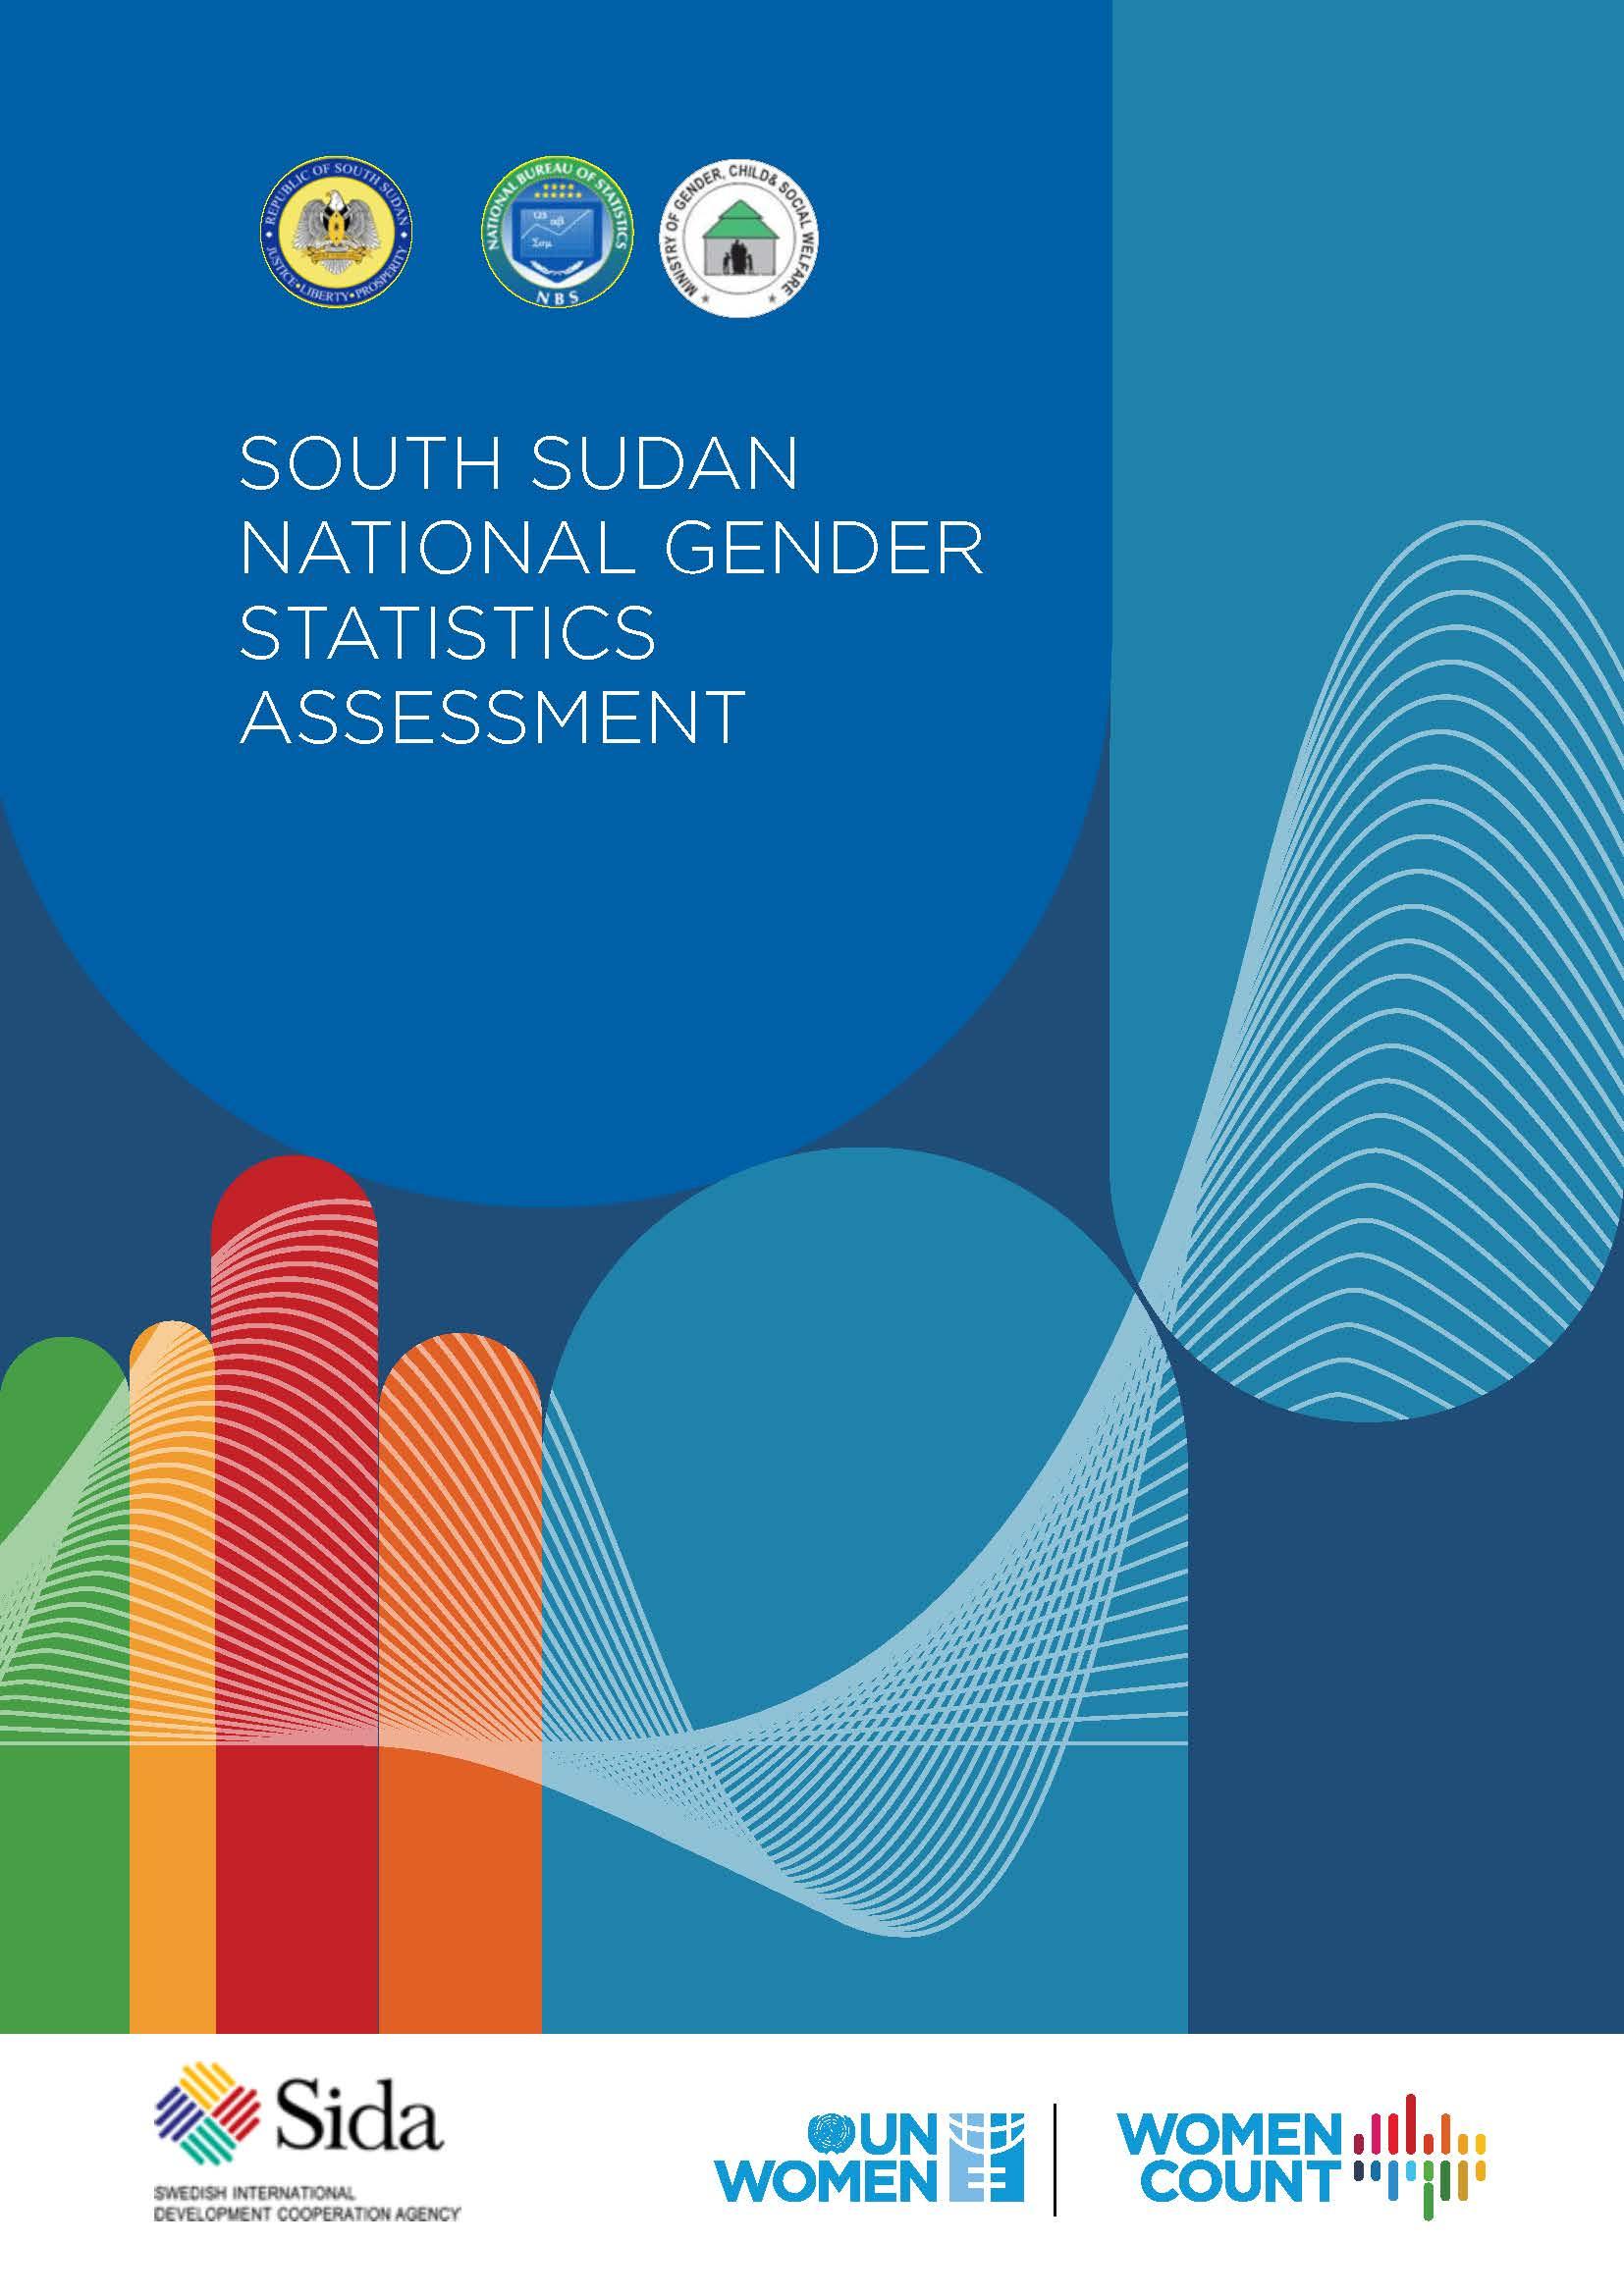 Assessment of gender data and capacity gaps in the national statistics system of South Sudan